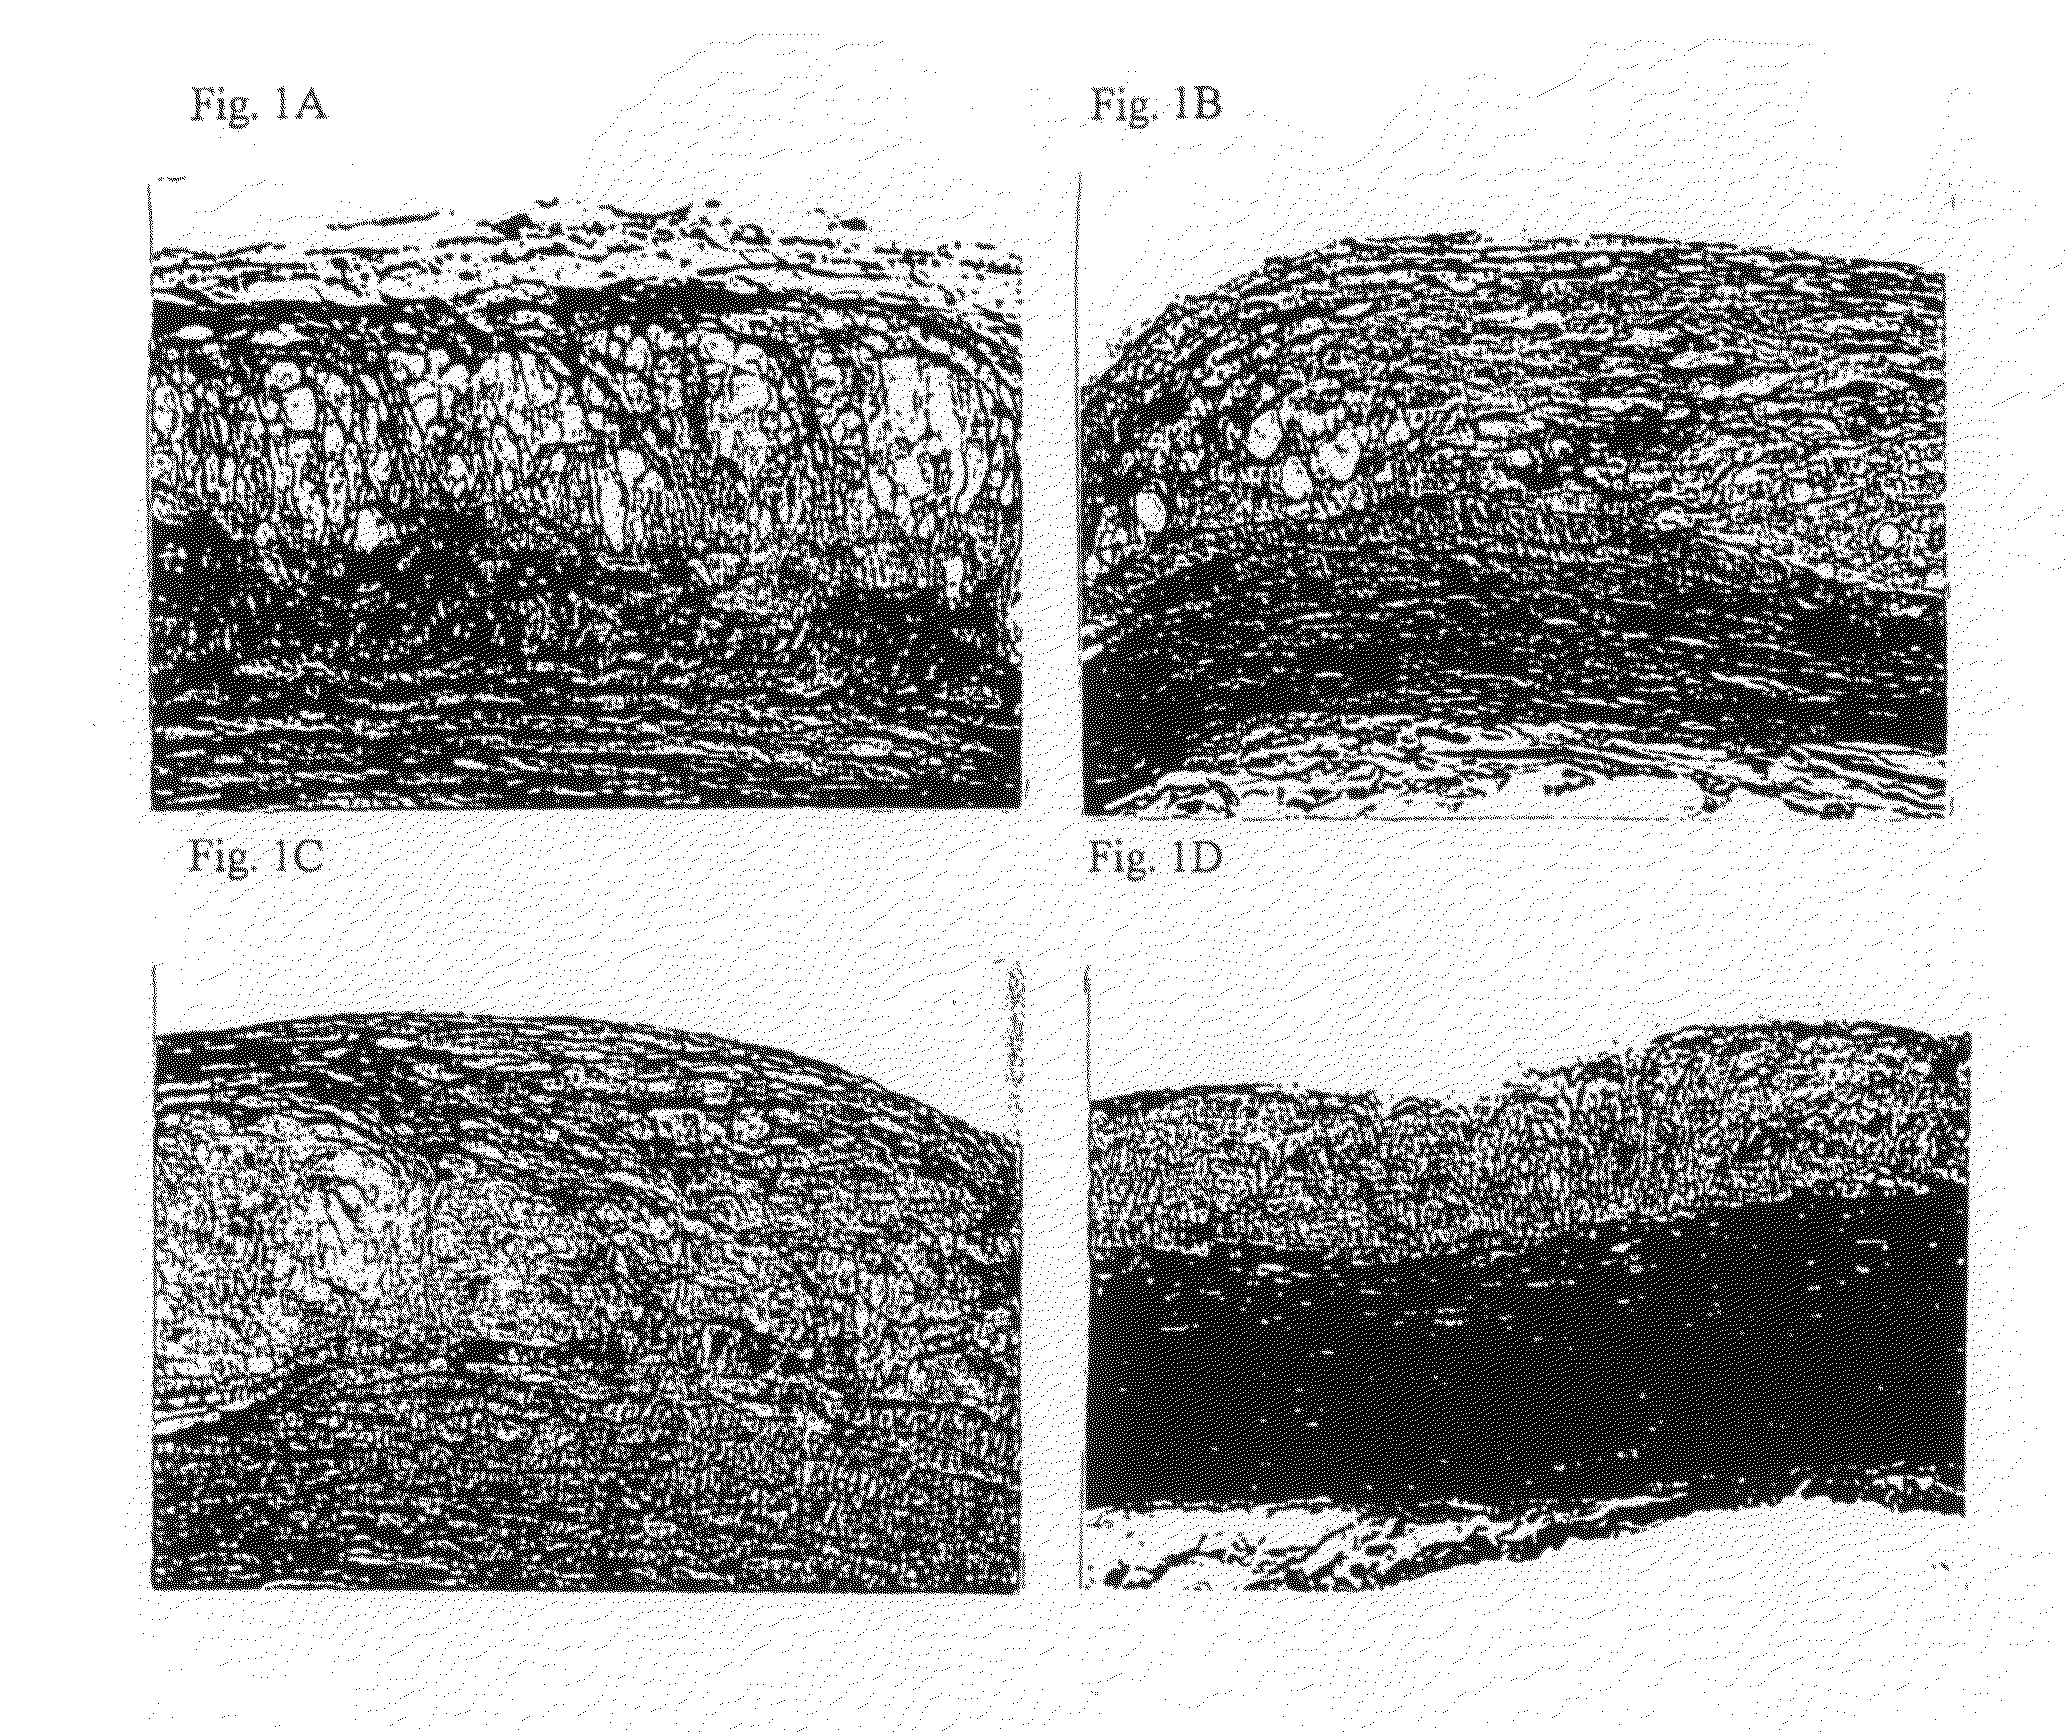 Method for reduction, stabilization and prevention of rupture of lipid rich plaque